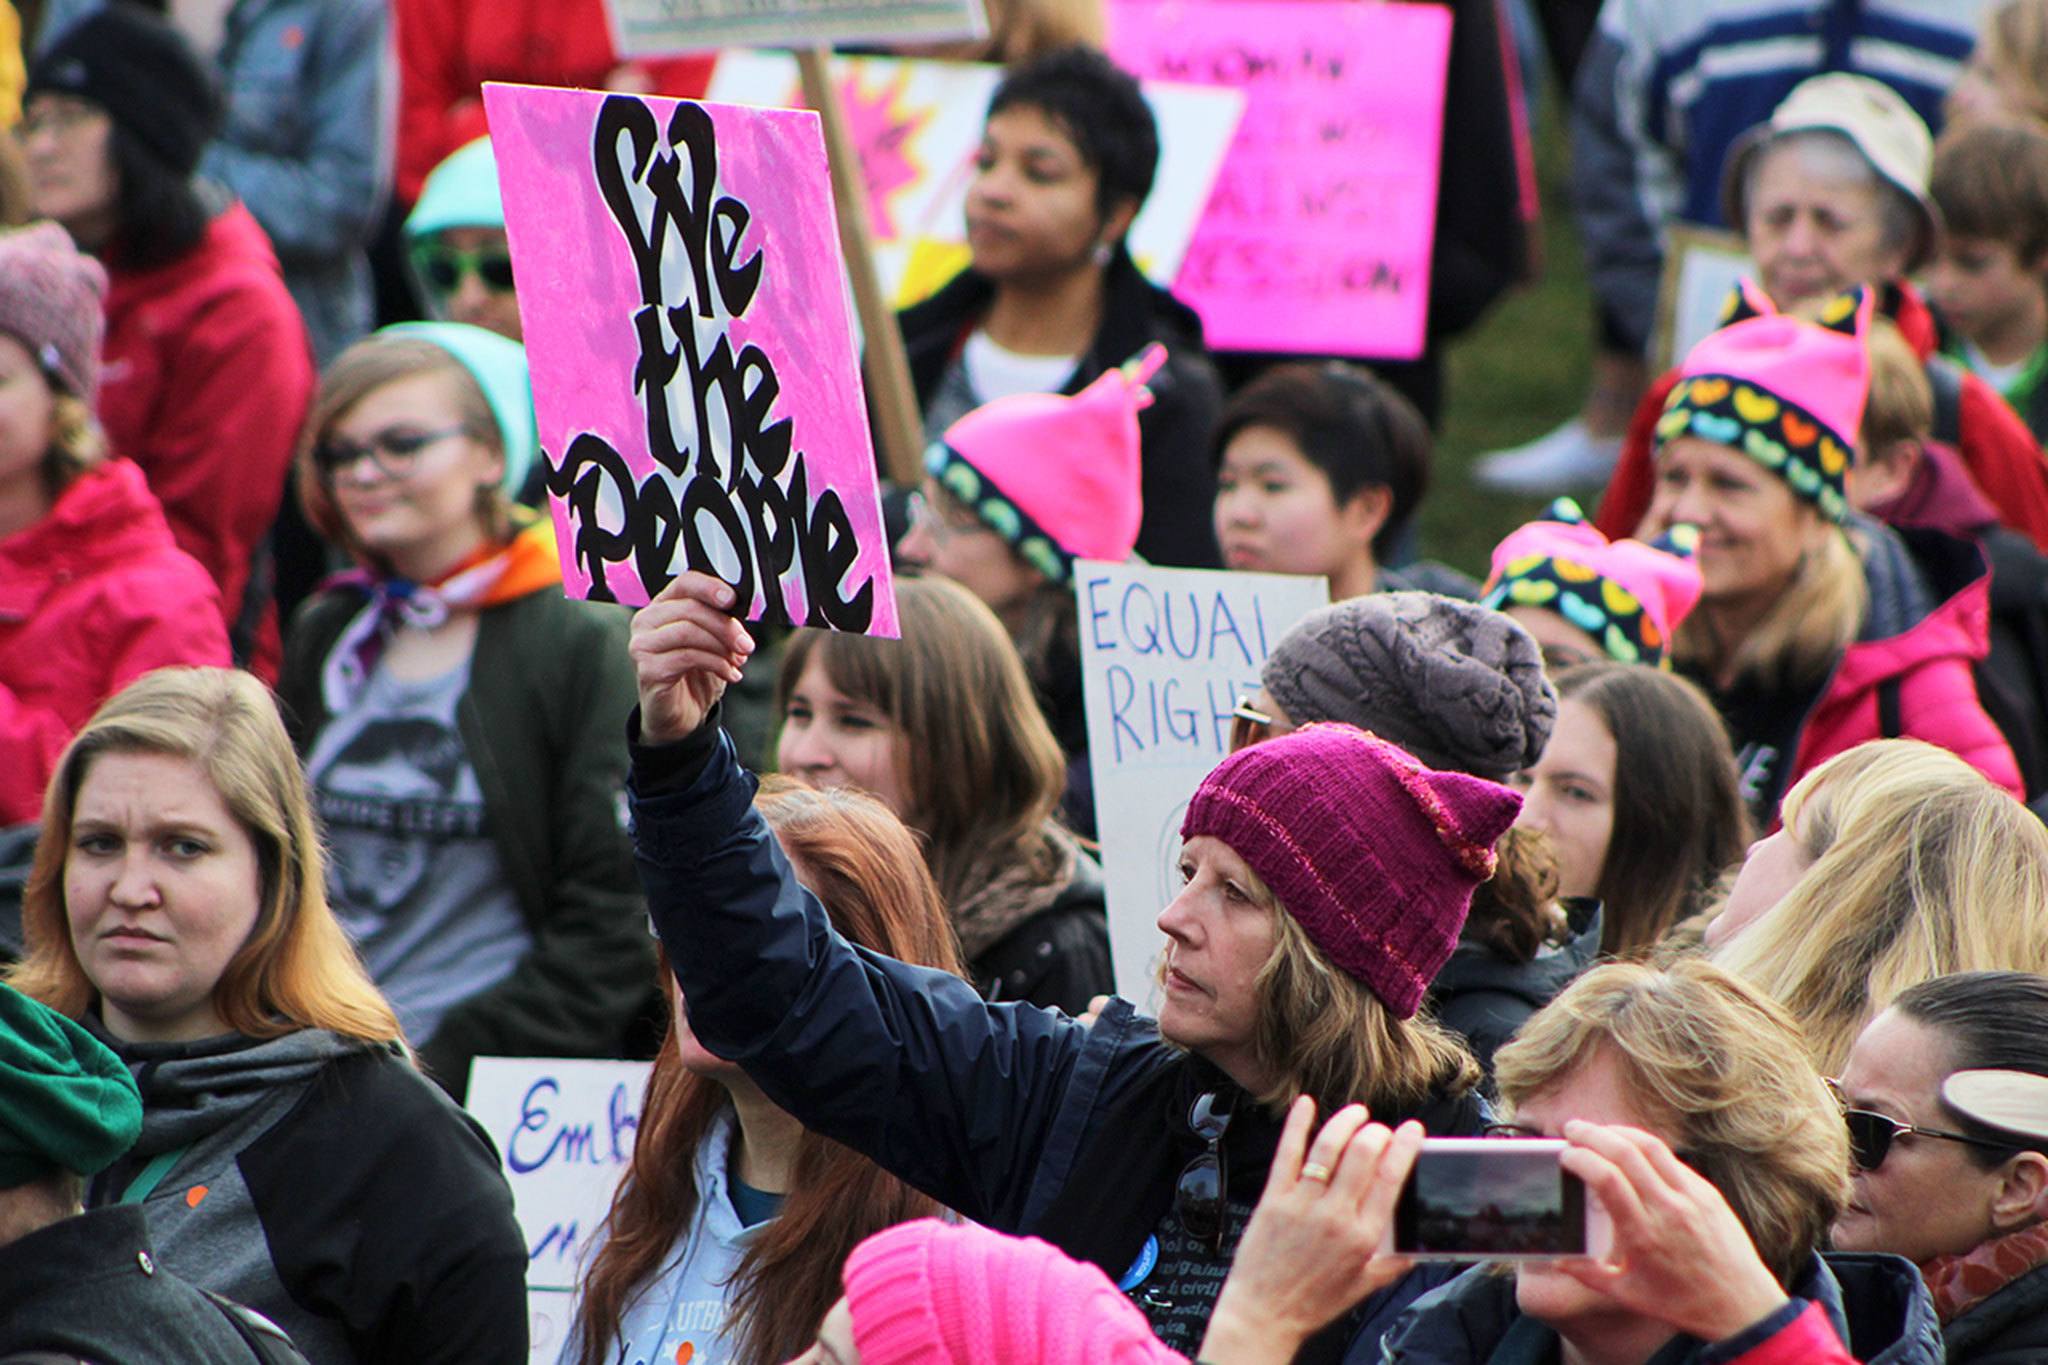 PHOTOS | Eastside residents vow not to be silenced at Women’s March